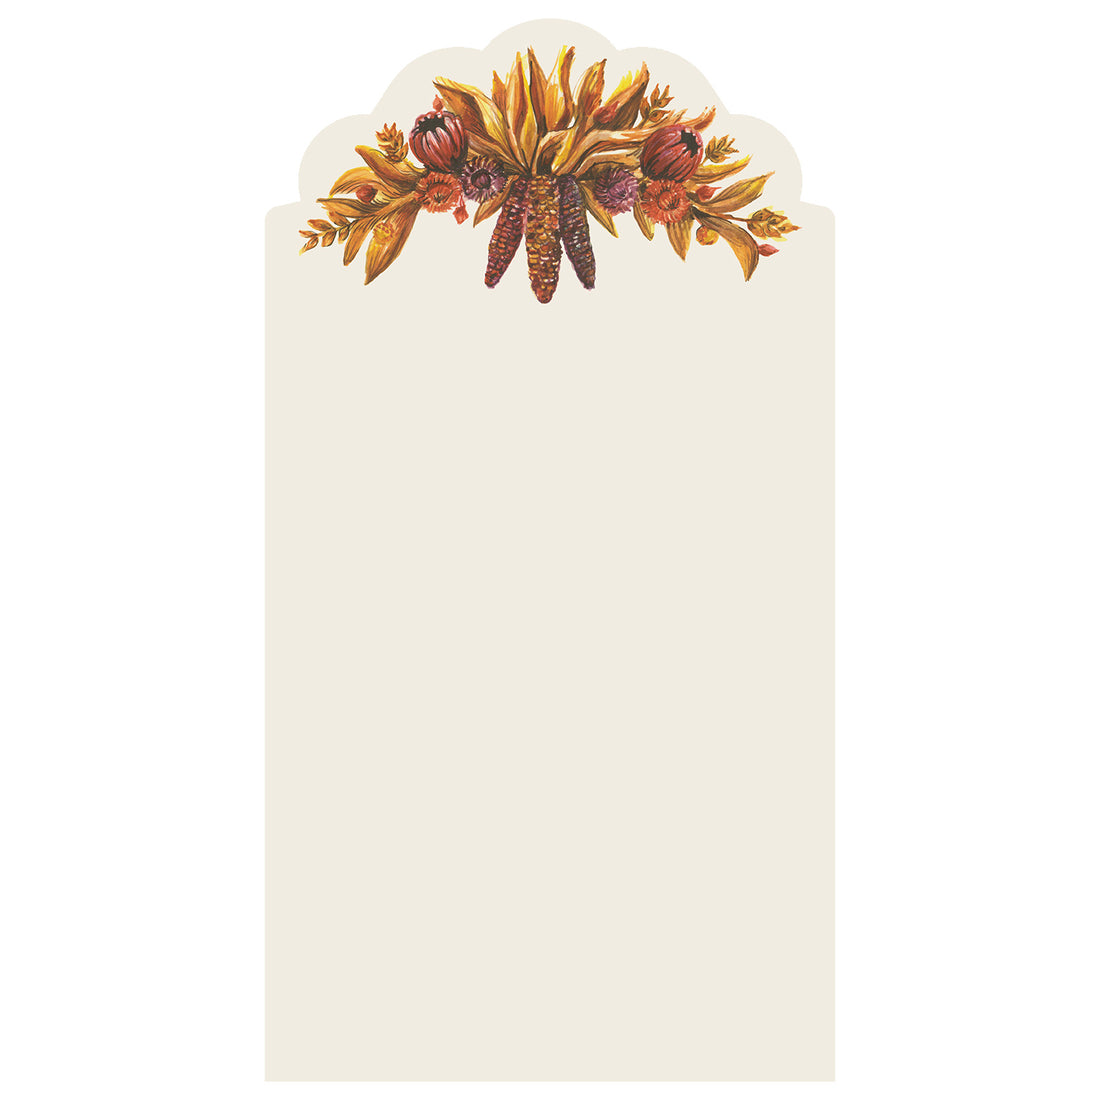 A white rectangular card with a die-cut scalloped top edge adorned with an illustration of colorful corn cobs with yellow husks surrounded by fall botanicals.